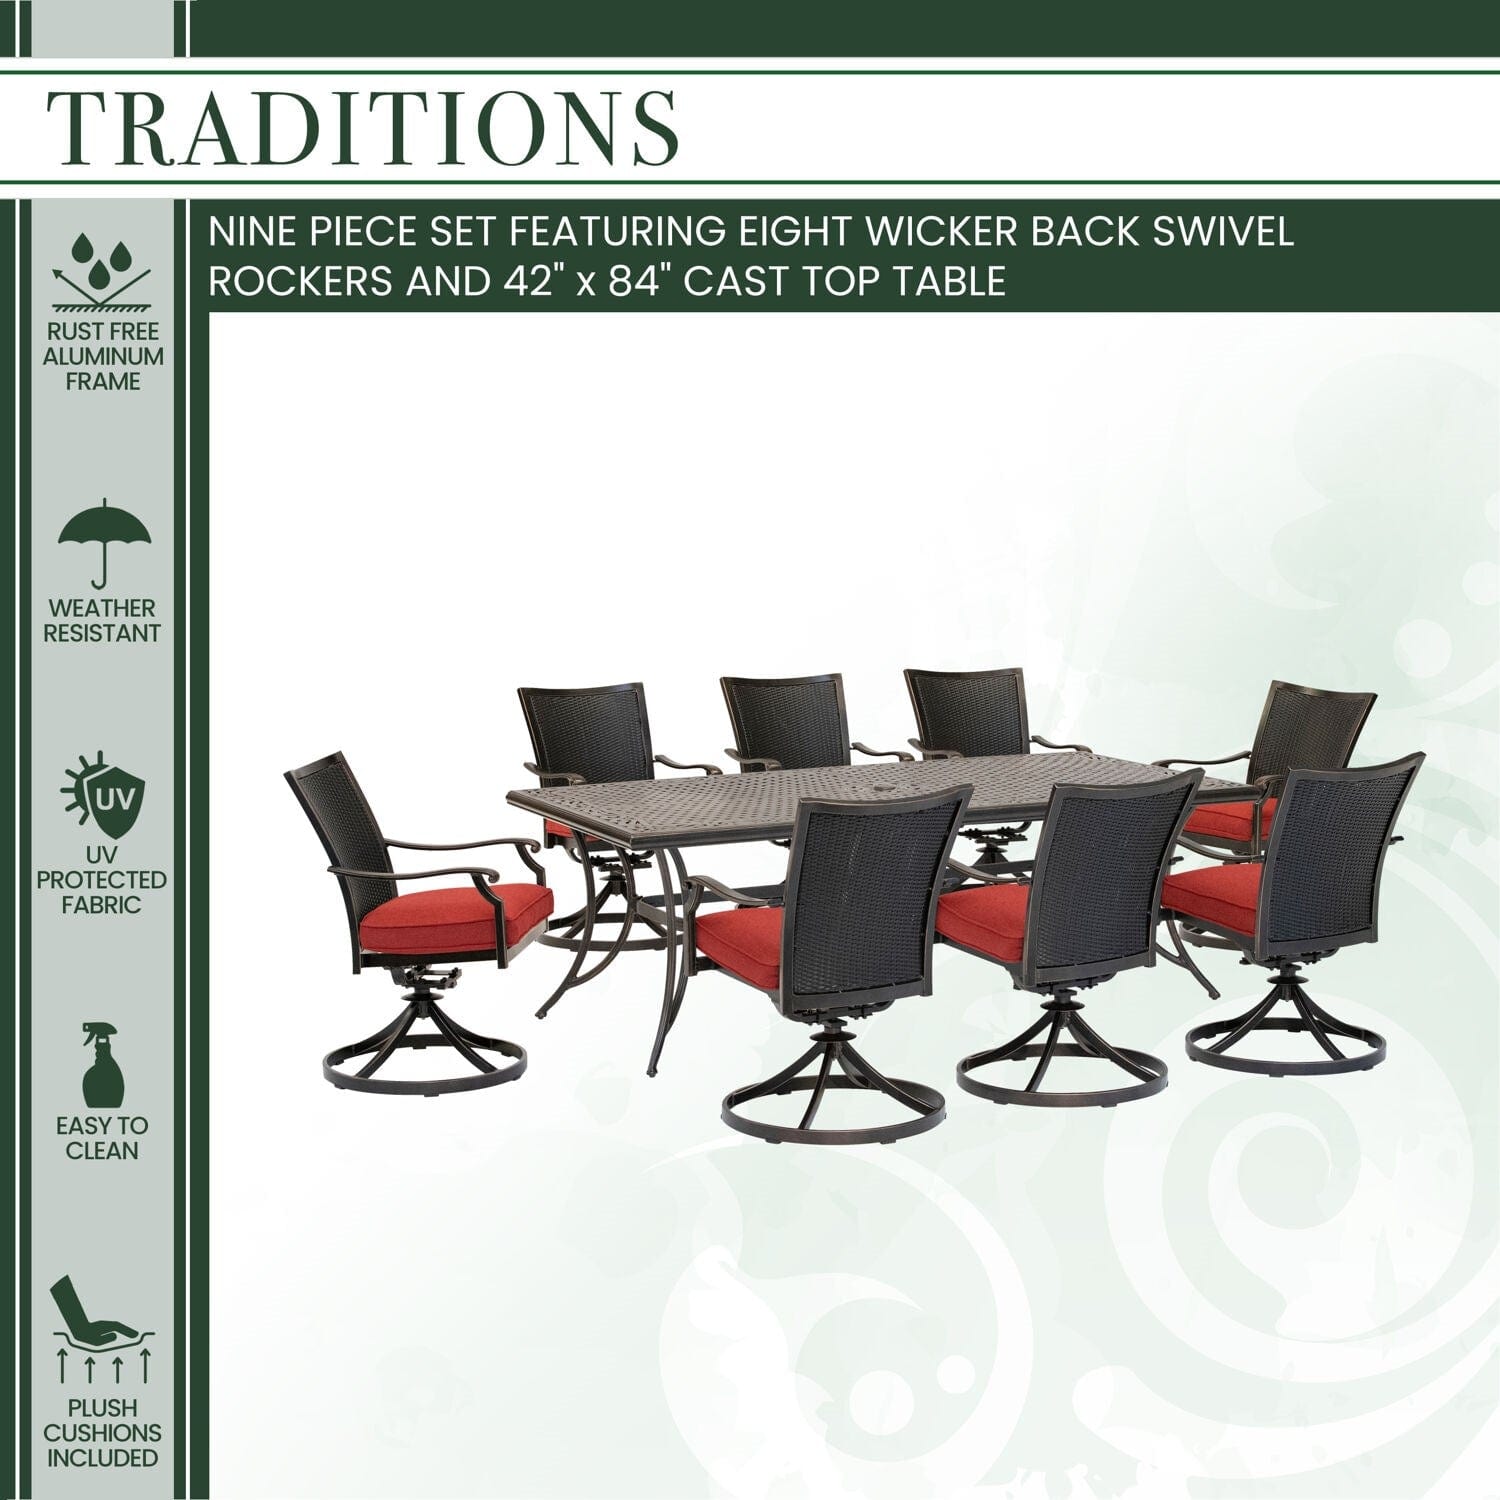 Hanover Outdoor Dining Set Hanover - Traditions 9-Piece Dining Set in Red with 8 Wicker Back Swivel Rockers and Extra Large 42 in. x 84 in. Cast-Top Table - TRADDNWB9PCSWC-RED